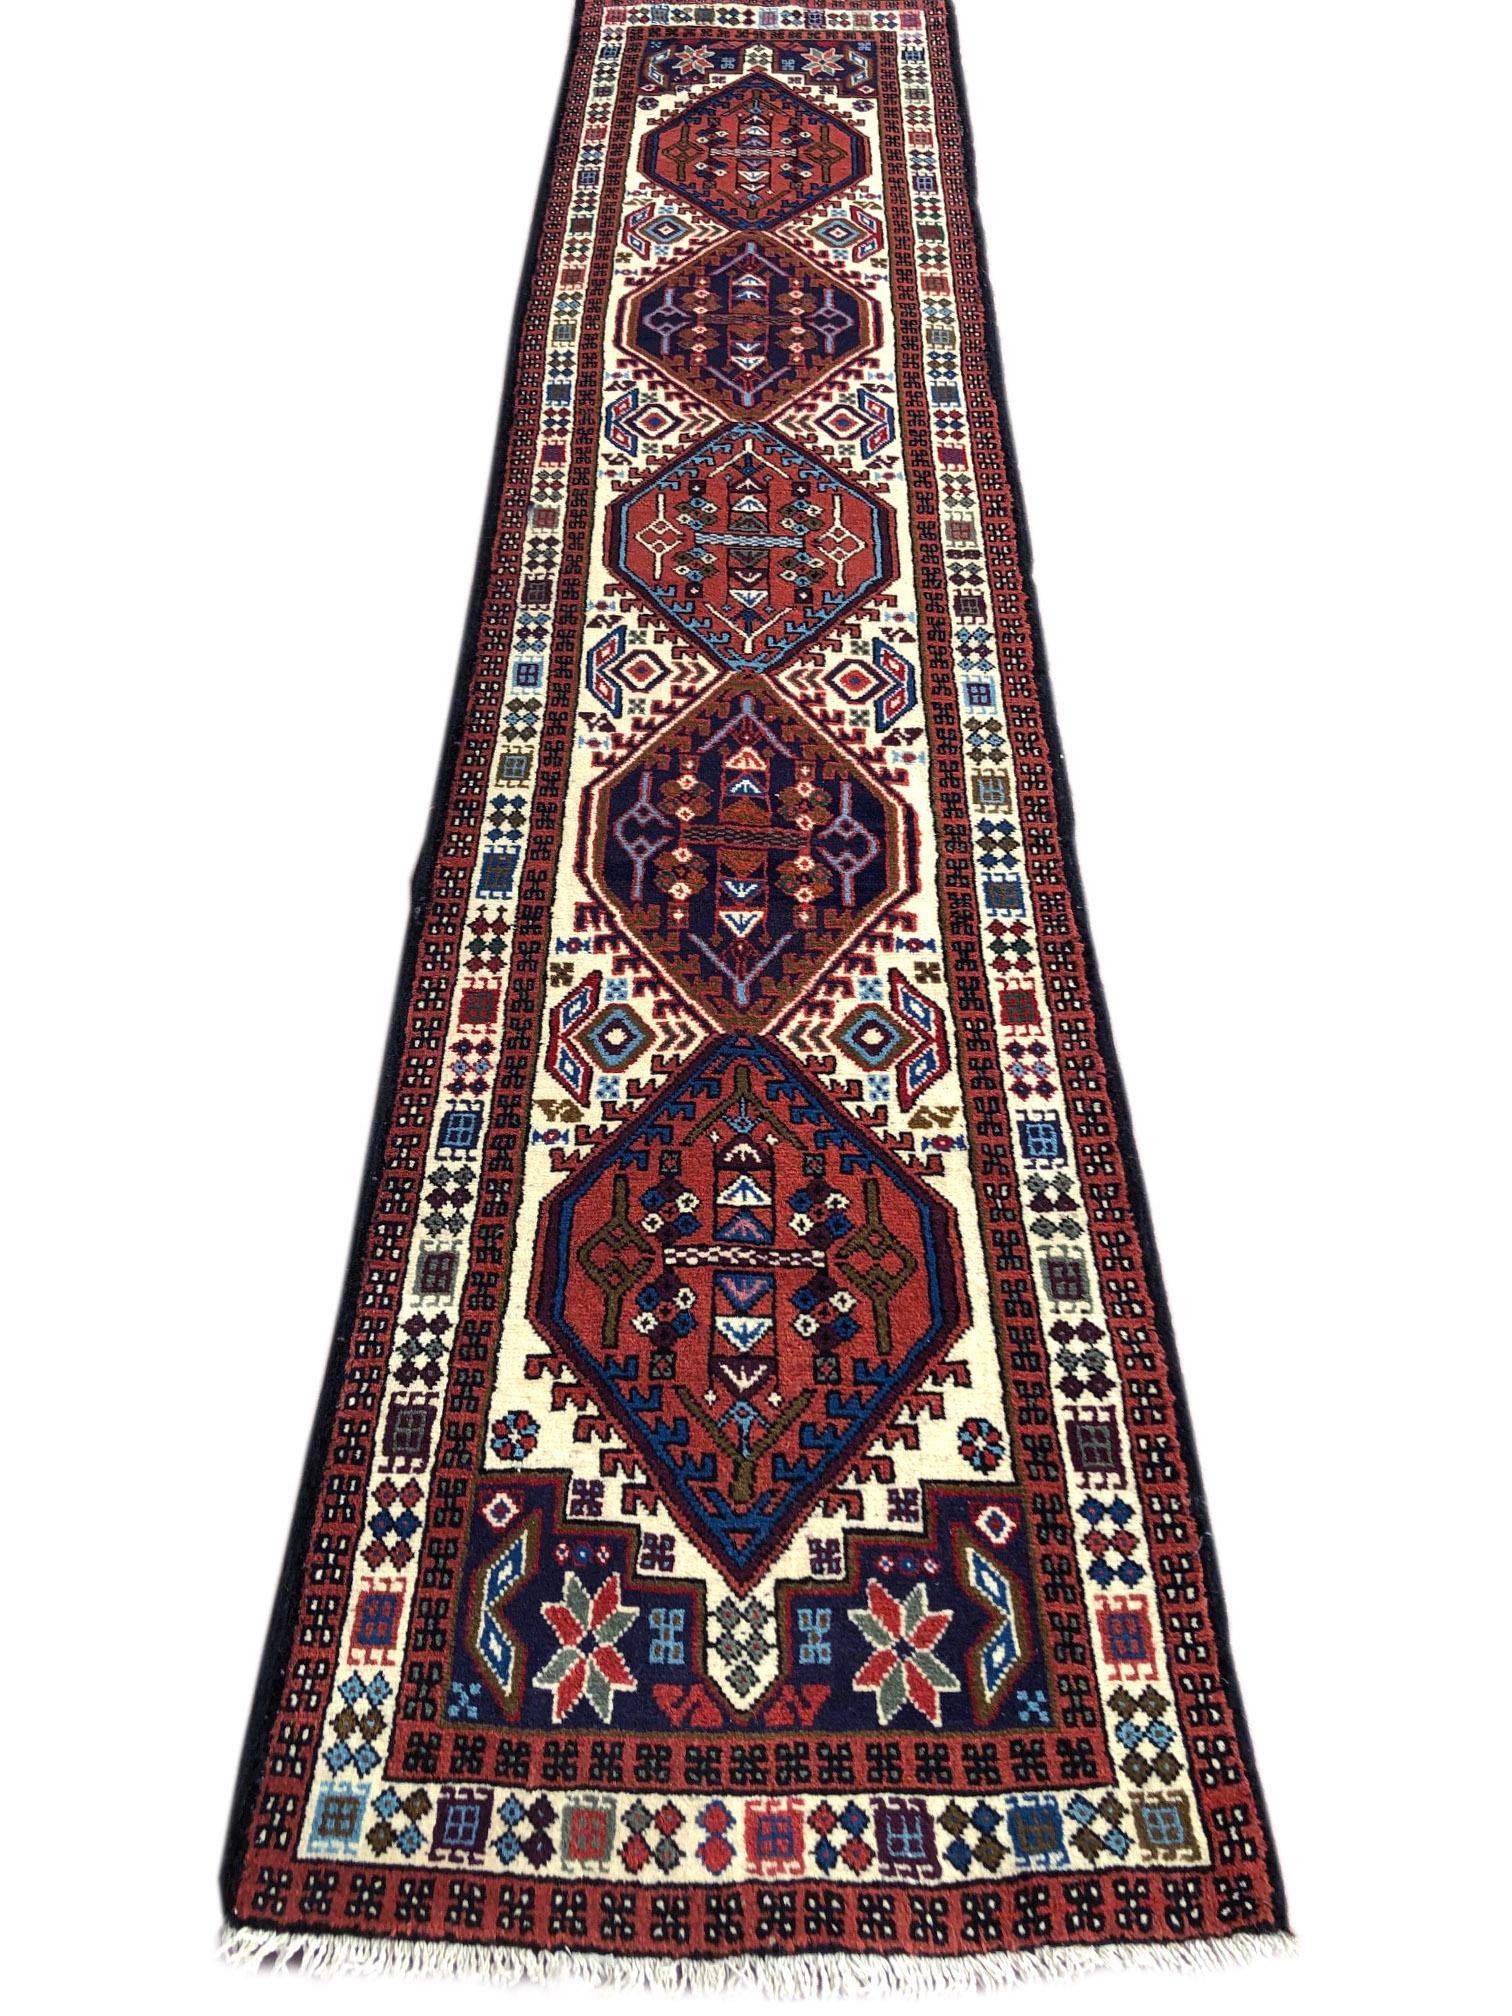 This runner is knotted in the province of Azarbayjan in north-west of Iran. The design is geometric with repeated medallion. The pile of these rugs are thick, lustrous wool, hand weaved with strong cotton as the material of choice for the